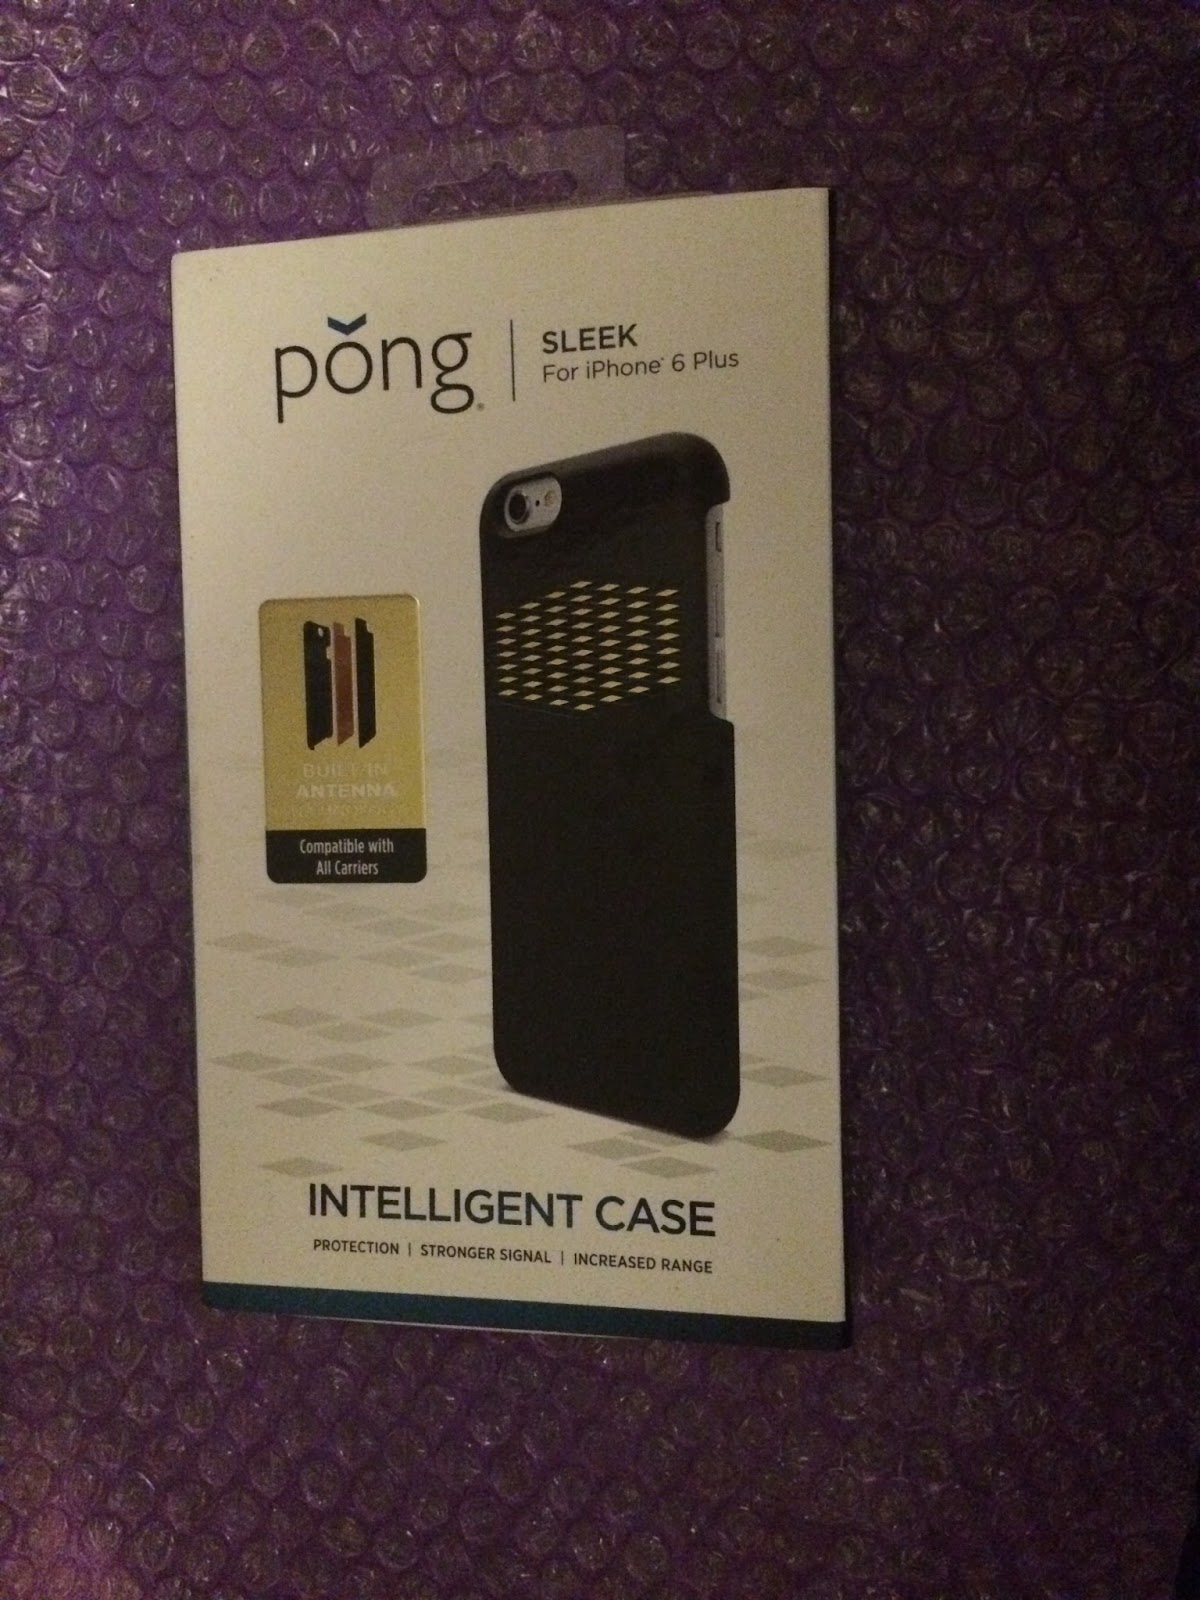 Pong Case review and giveaway